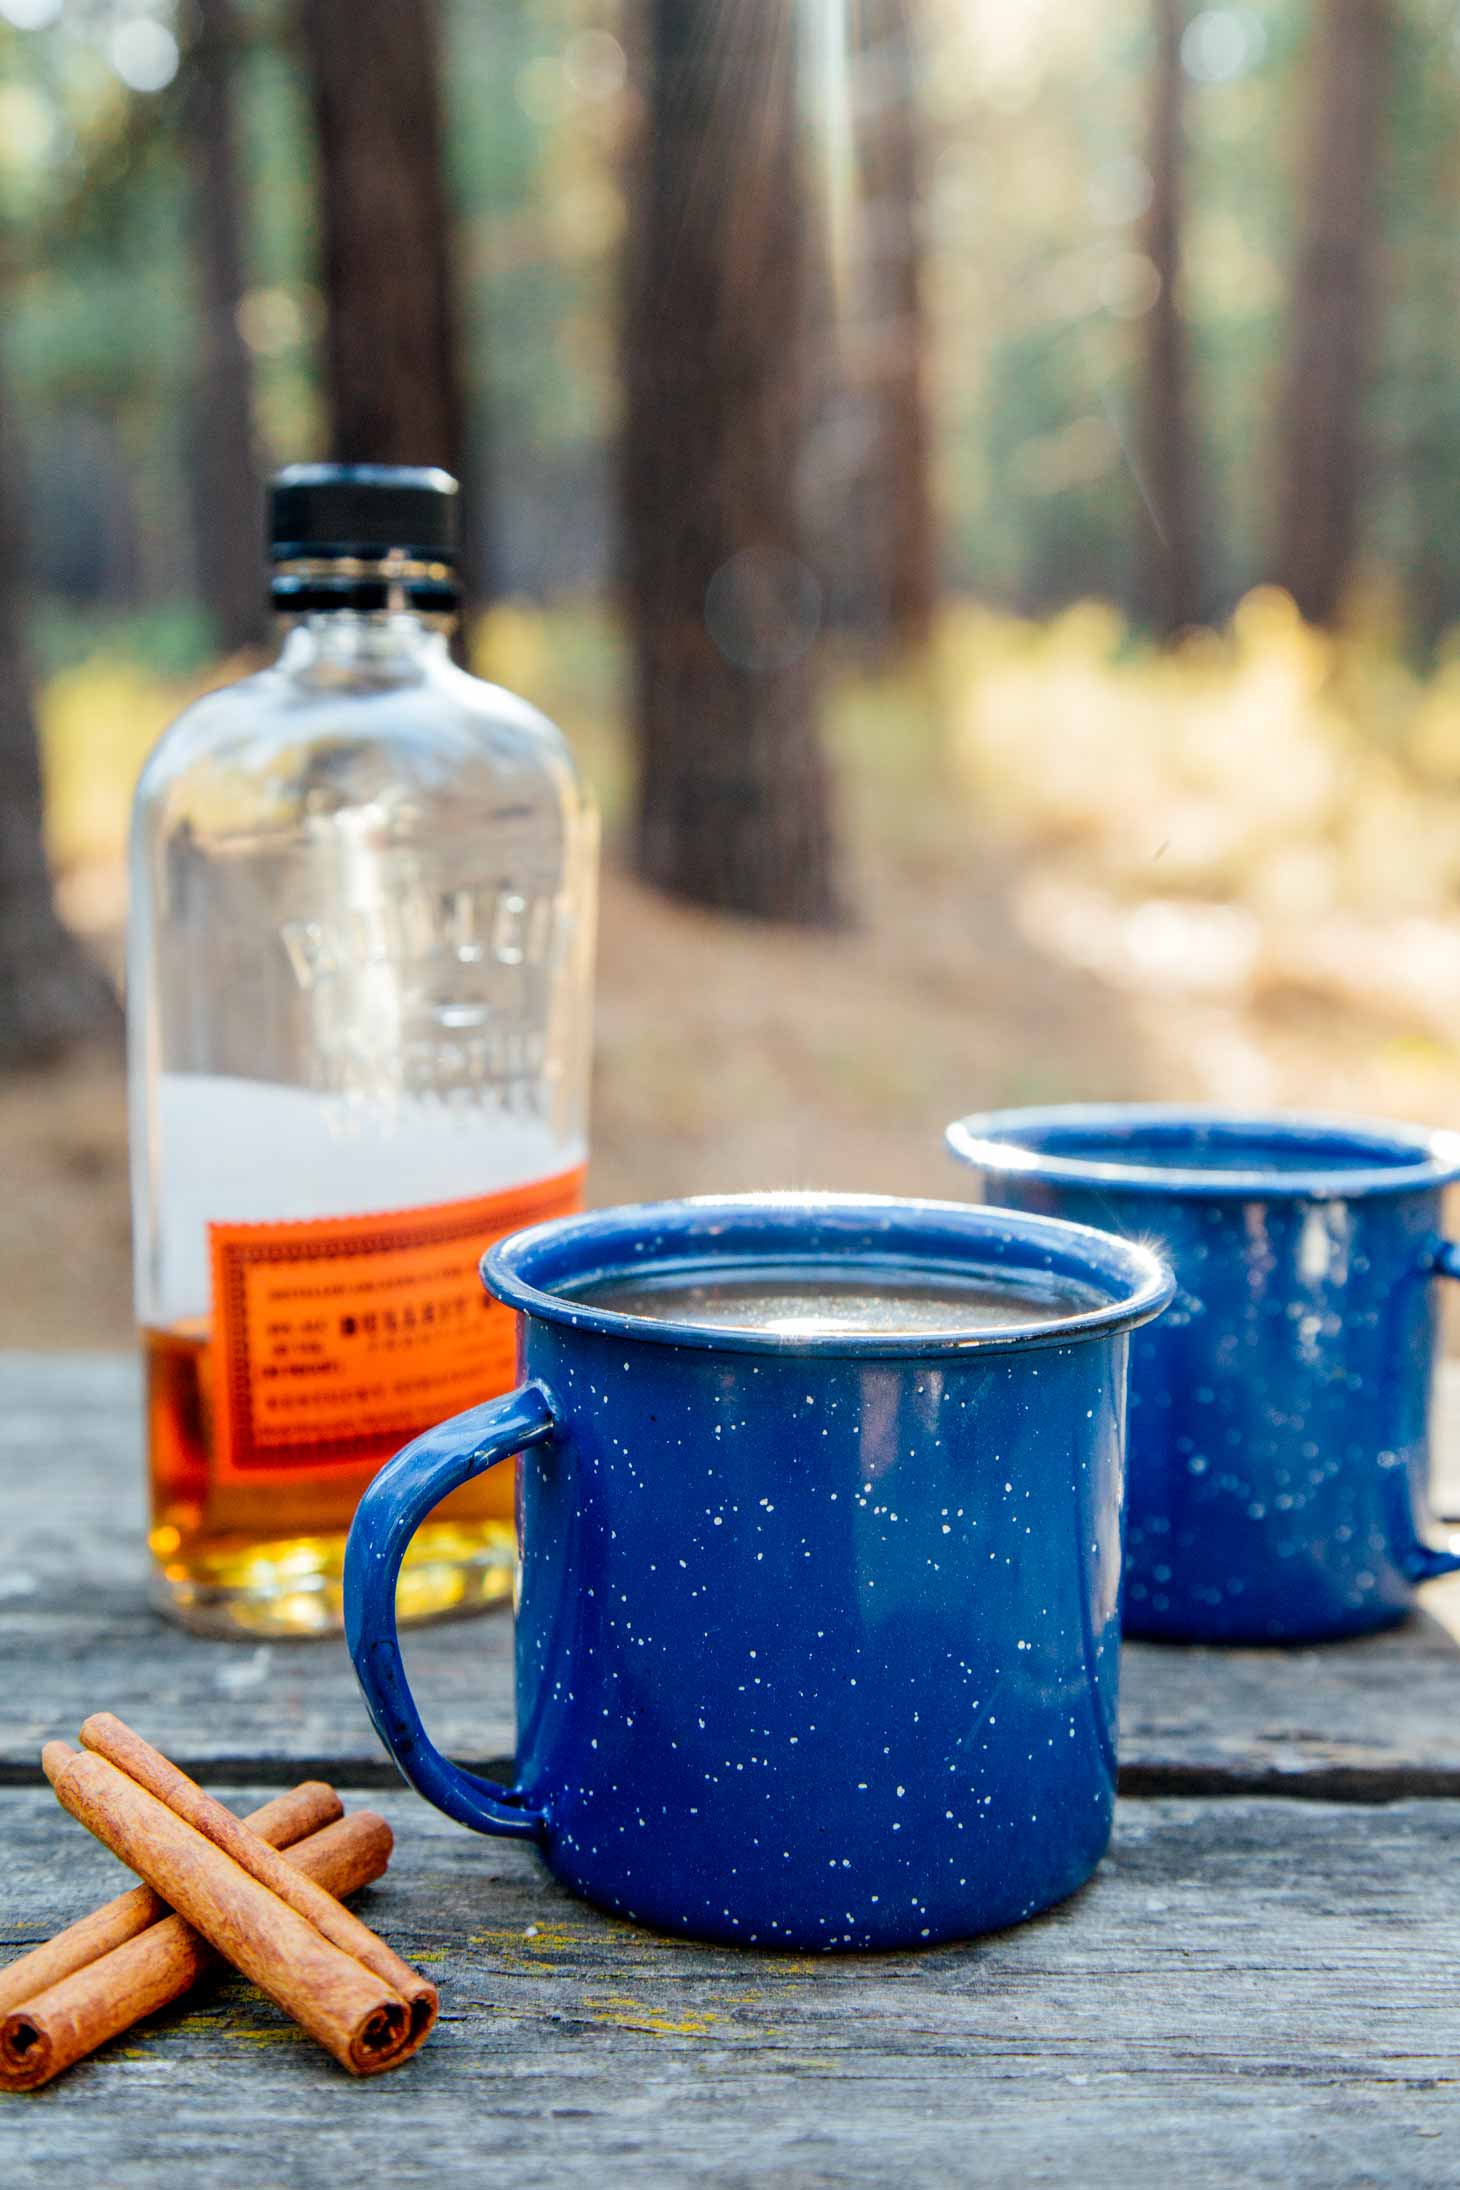 Forest scene with two camping mugs of spiked apple cider with a bottle of bourbon in the background.